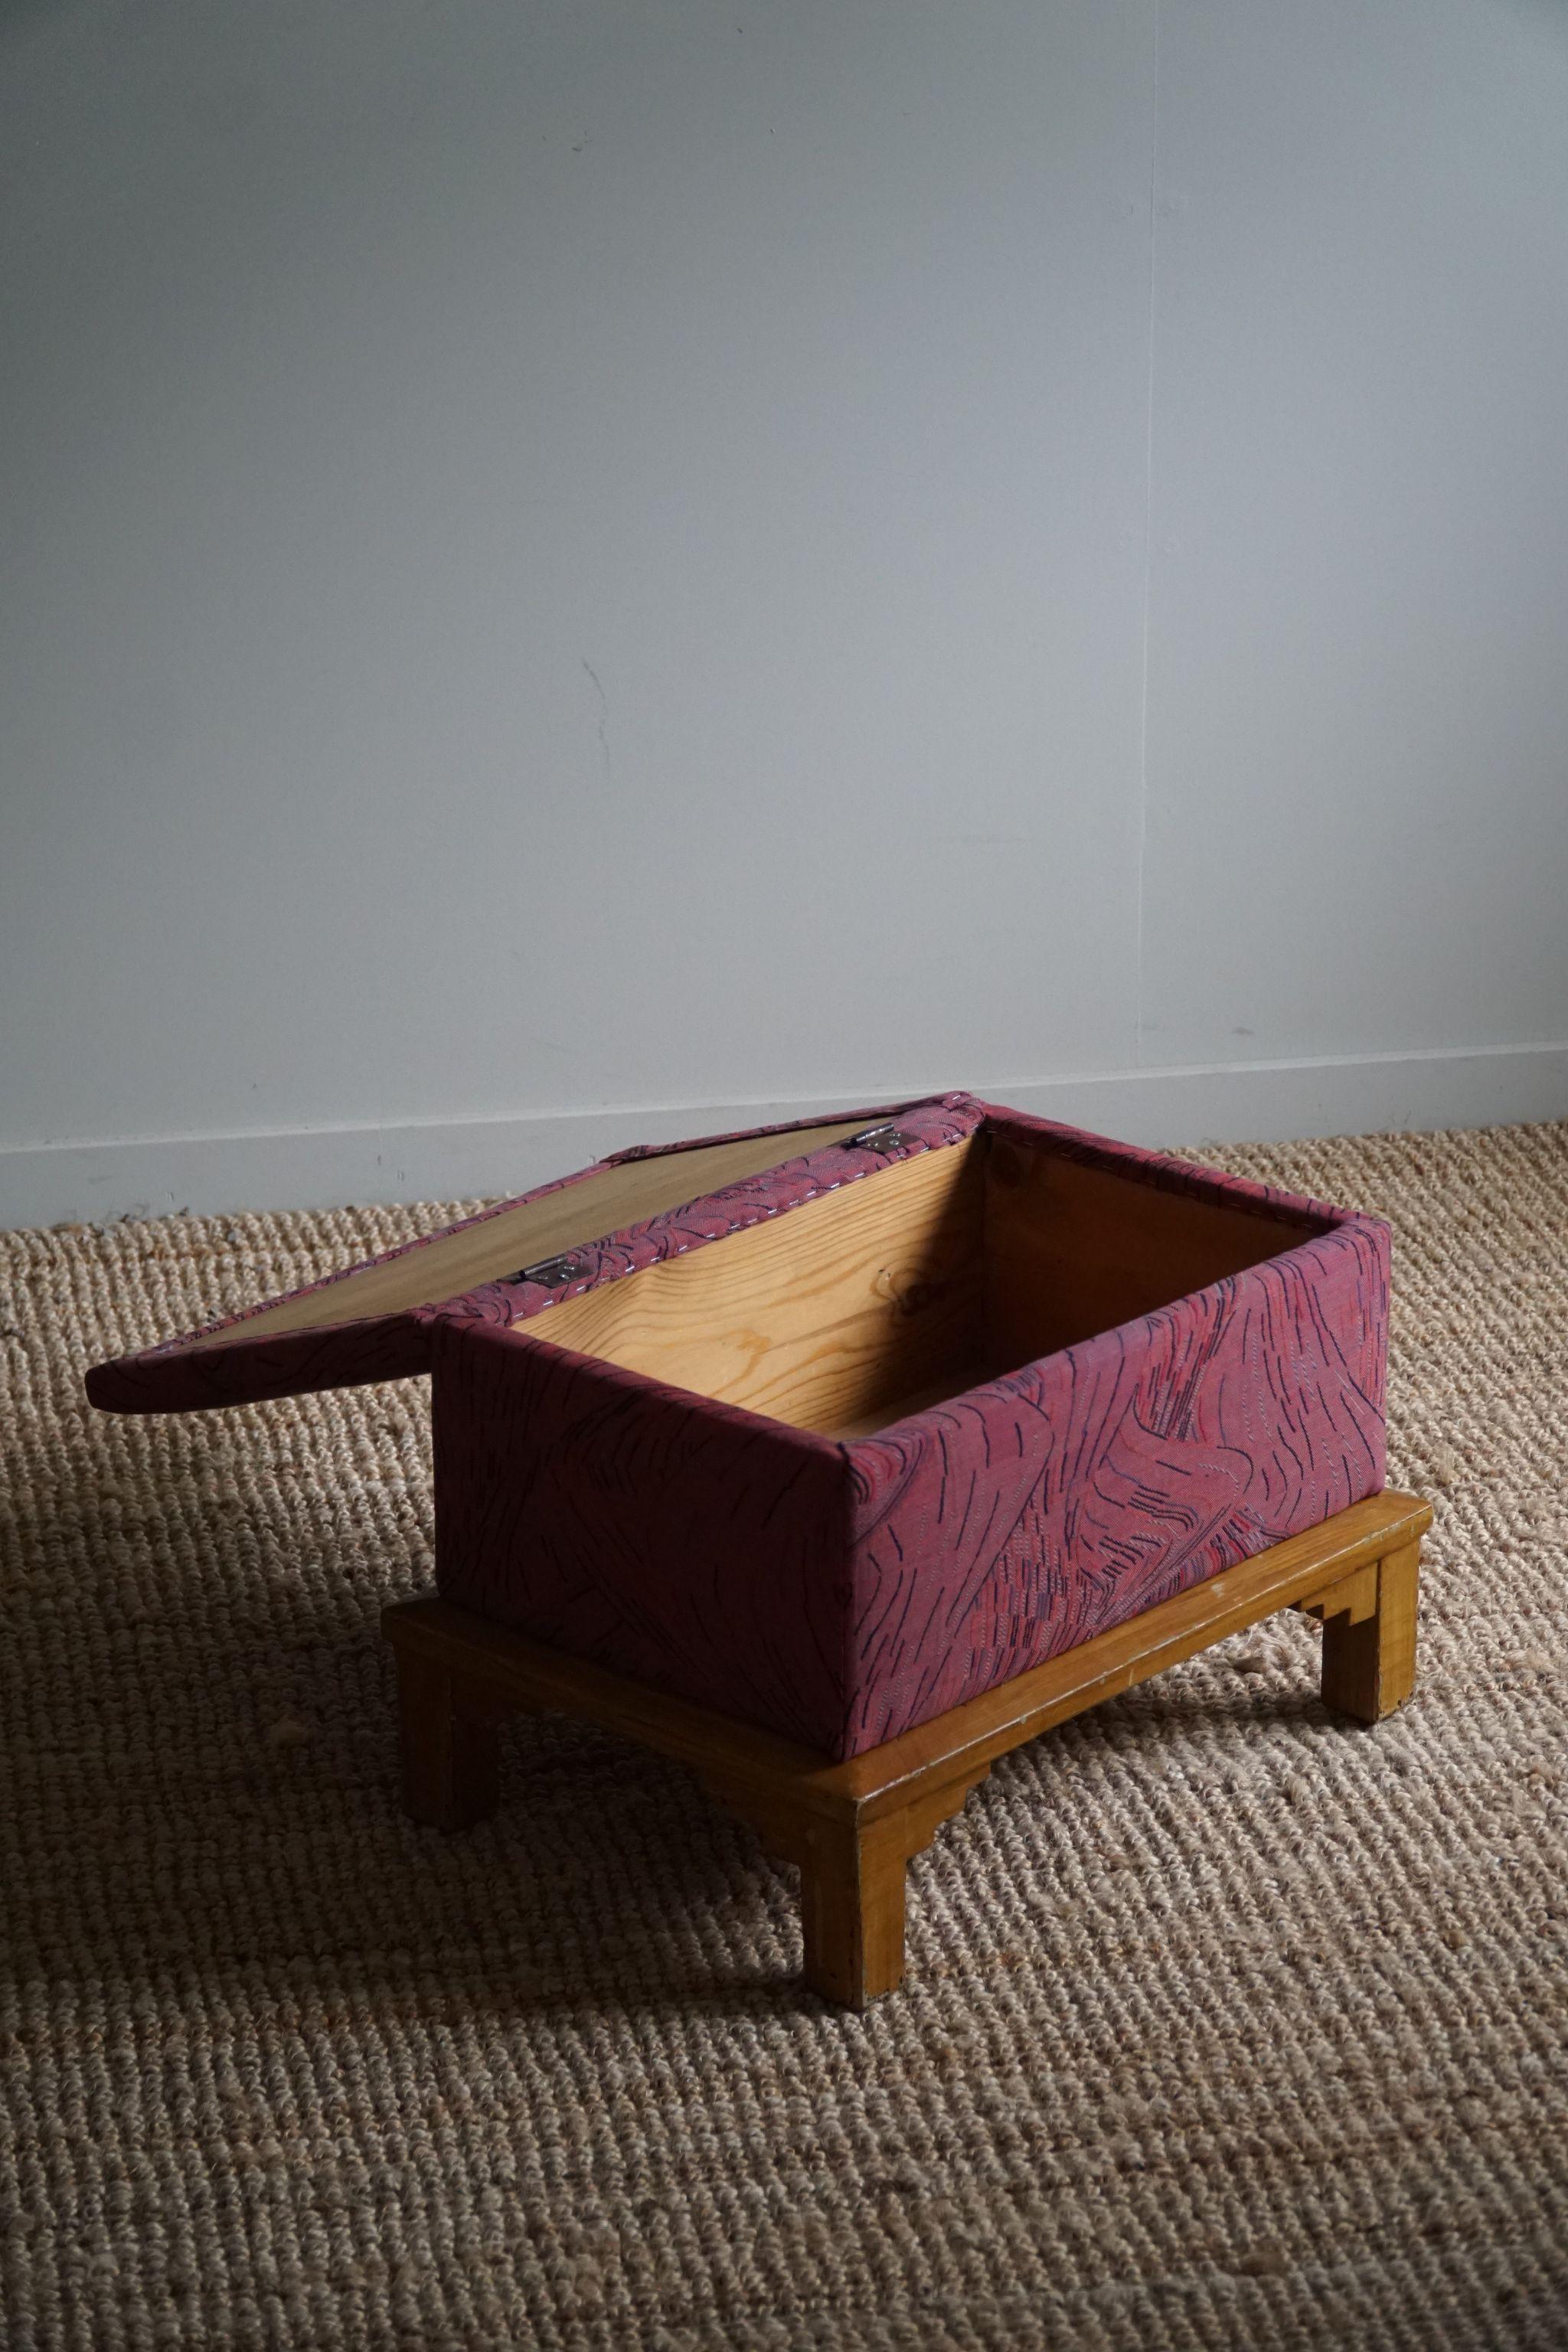 20th Century French Art Deco, Sculptural Stool with Storage, Reupholstered, Made in the 1940s For Sale